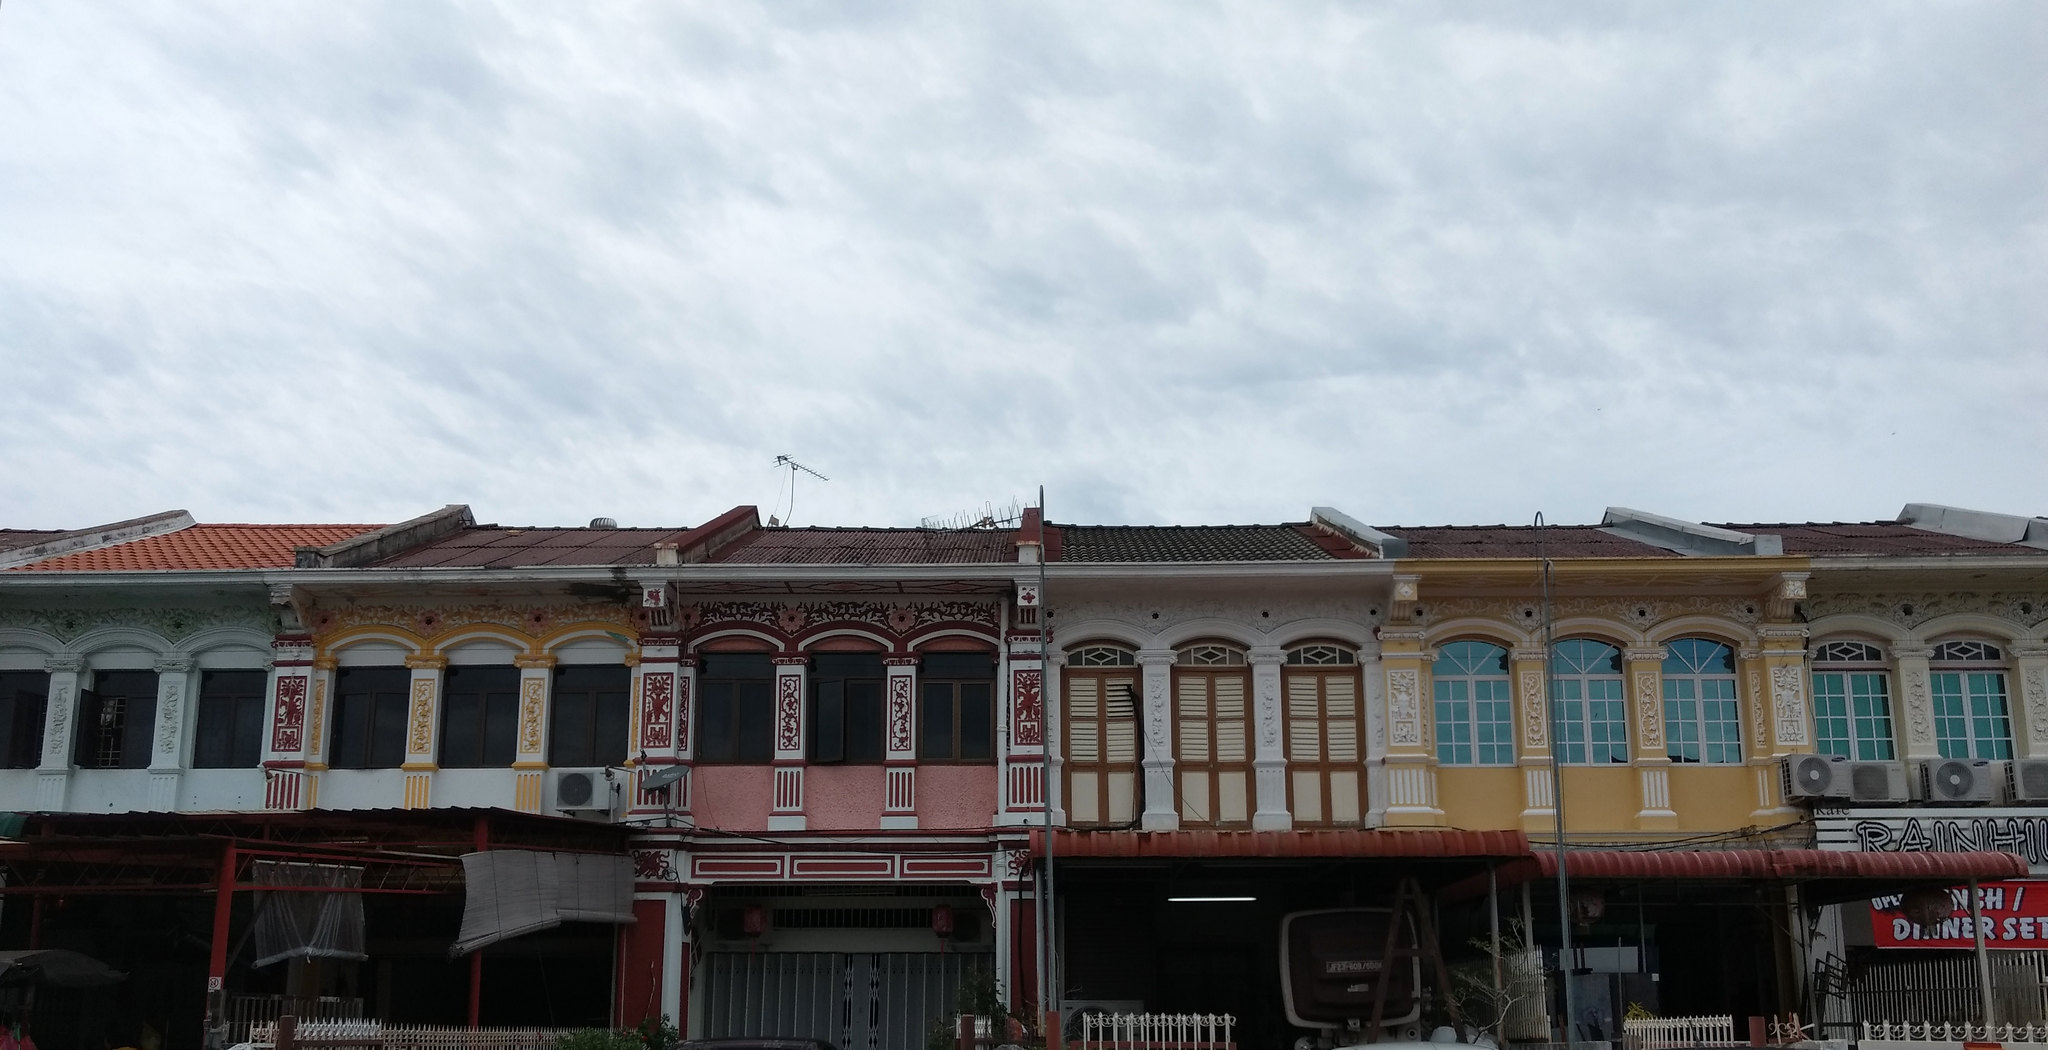 Perfectly in sync house colors, George Town - Penang